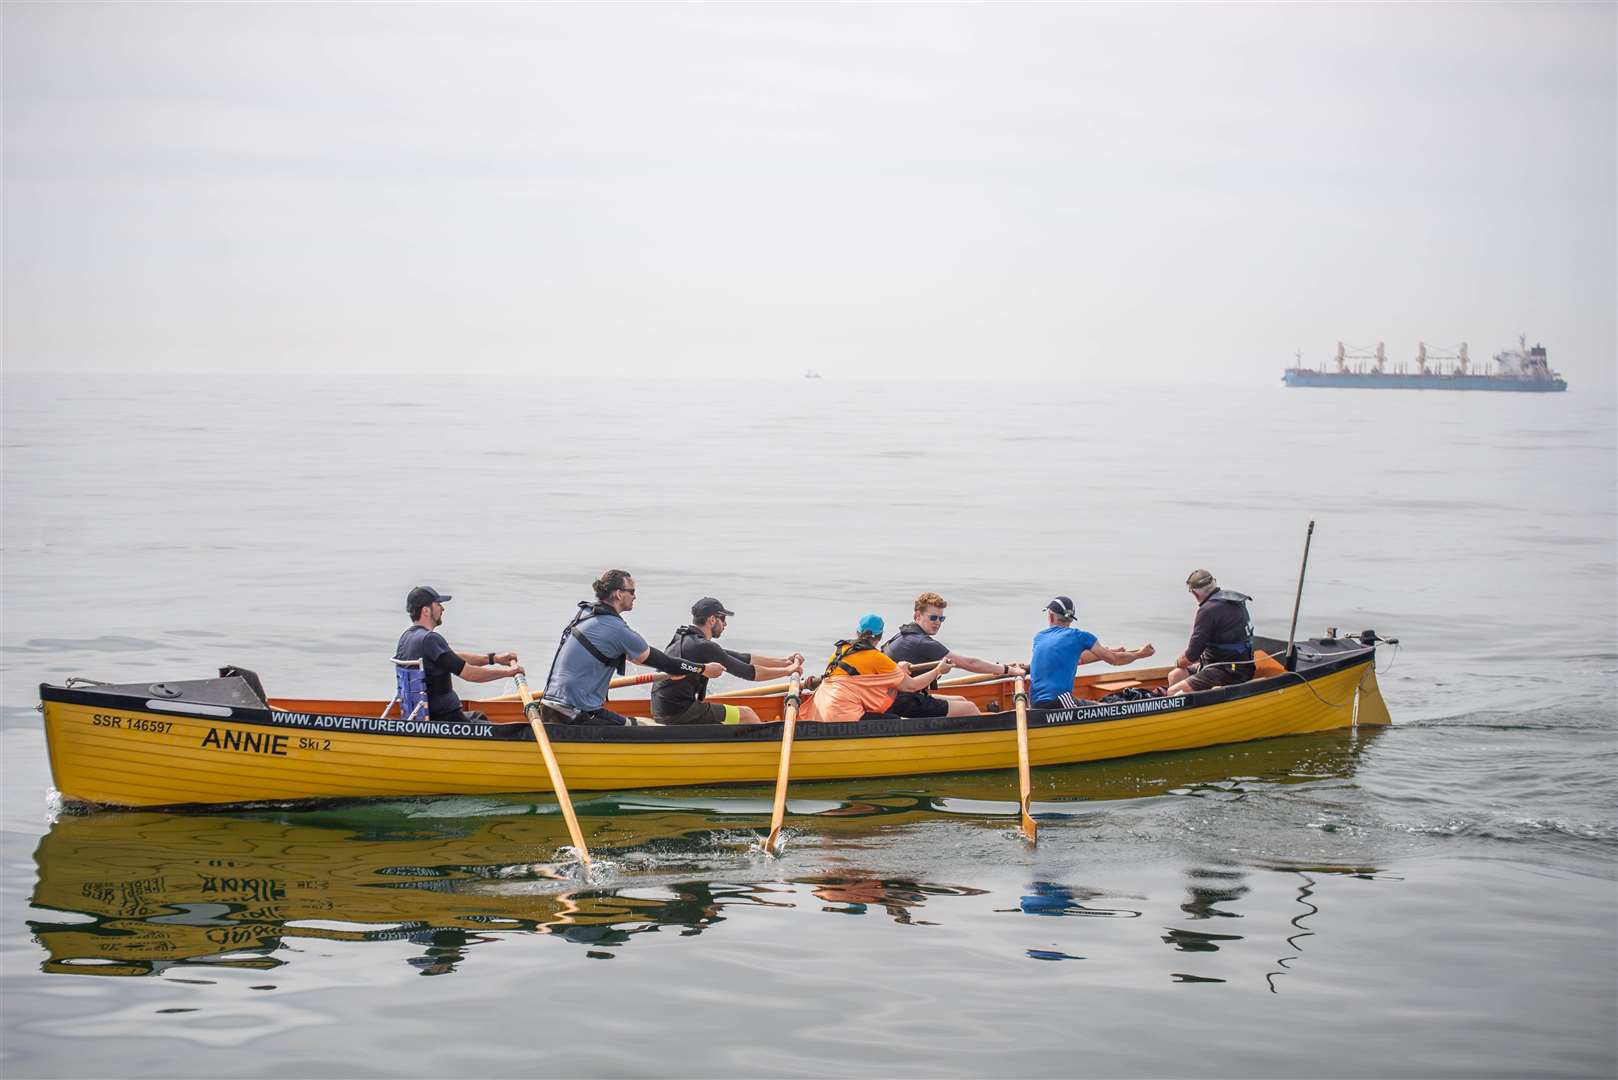 Louis Alexander (third right) rowed English Channel in May as one of his fundraising challenges for Alzheimer’s UK (Josh Raper/PA)